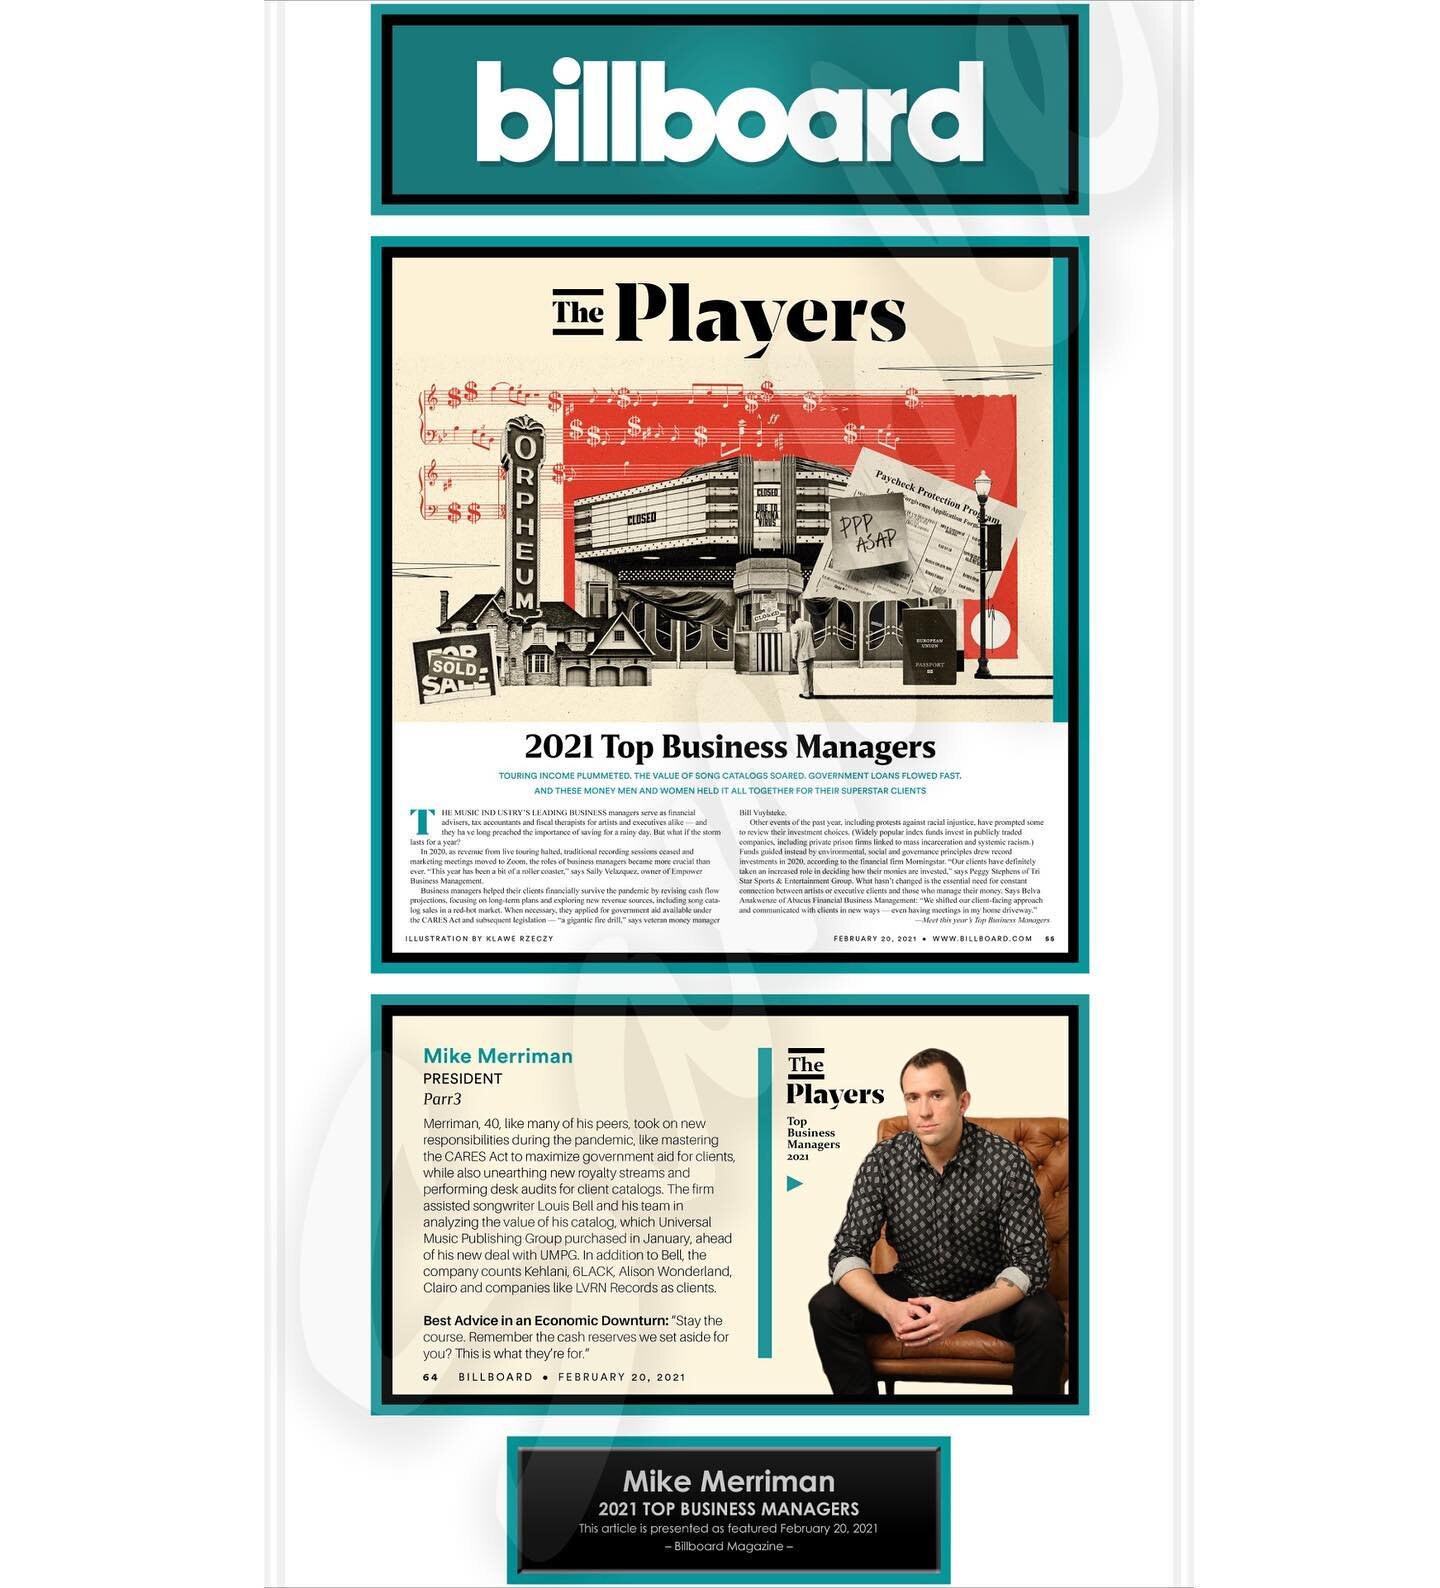 Thanks @billboard for including PARR3 in your 2021 Top Business Managers list!